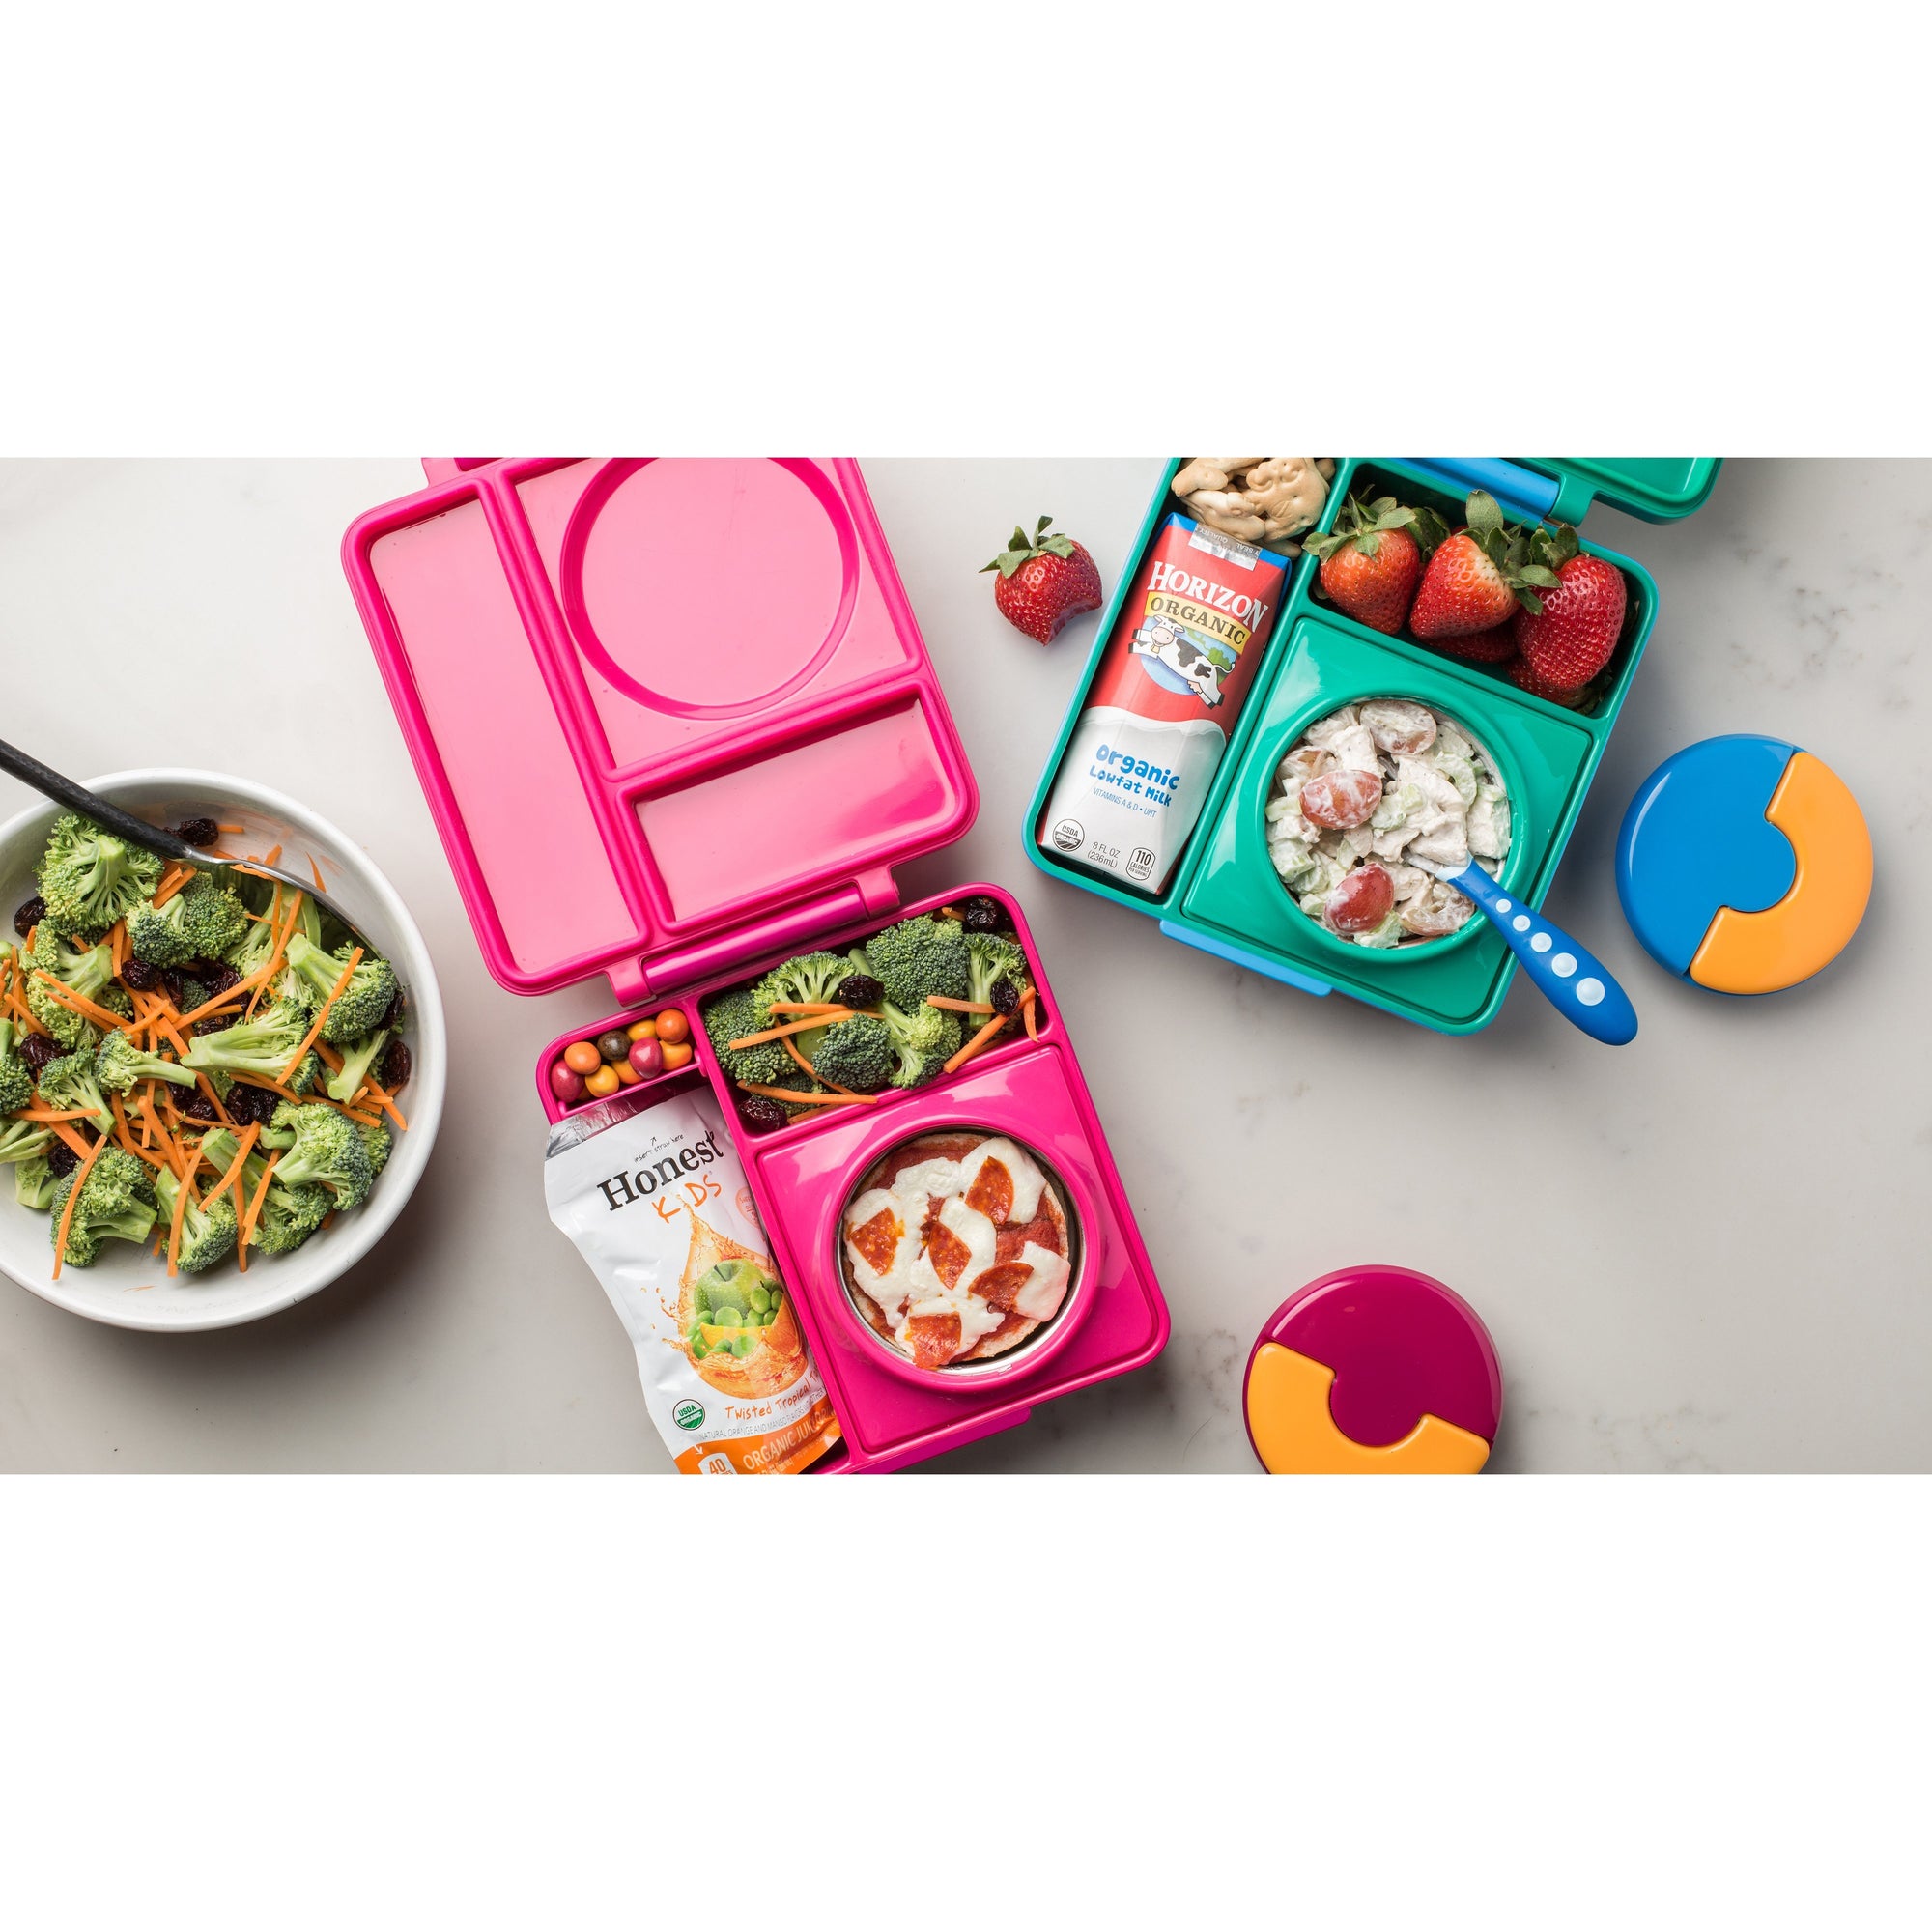 OmieBox Bento Box for Kids - Insulated Lunch Box with Leak Proof Thermos  Food Jar - 3 Compartments, Two Temperature Zones - (Meadow) (Single)